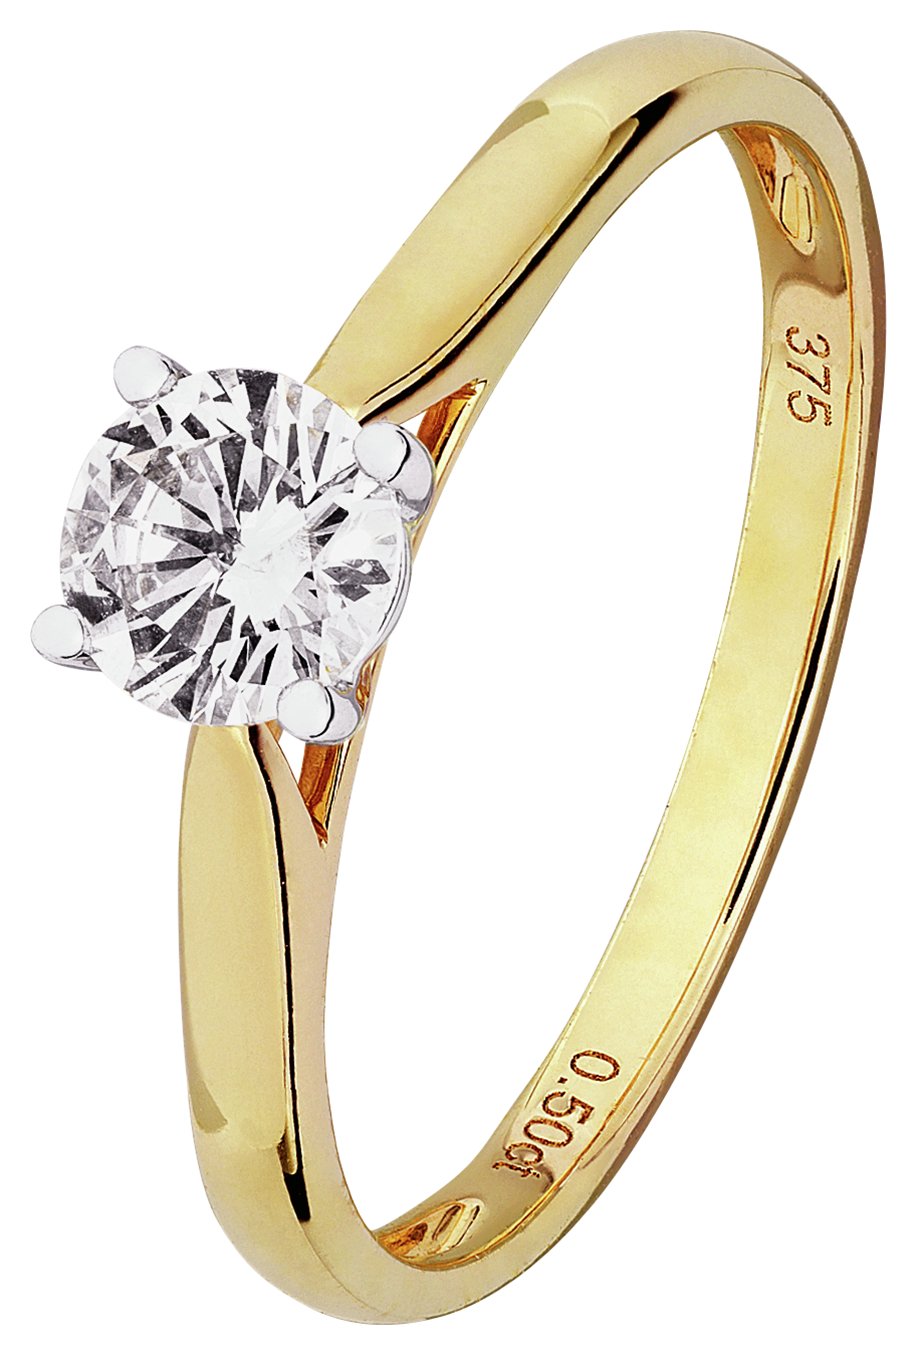 Revere 9ct Gold 0.50ct Diamond Soitaire Engagement Ring - R